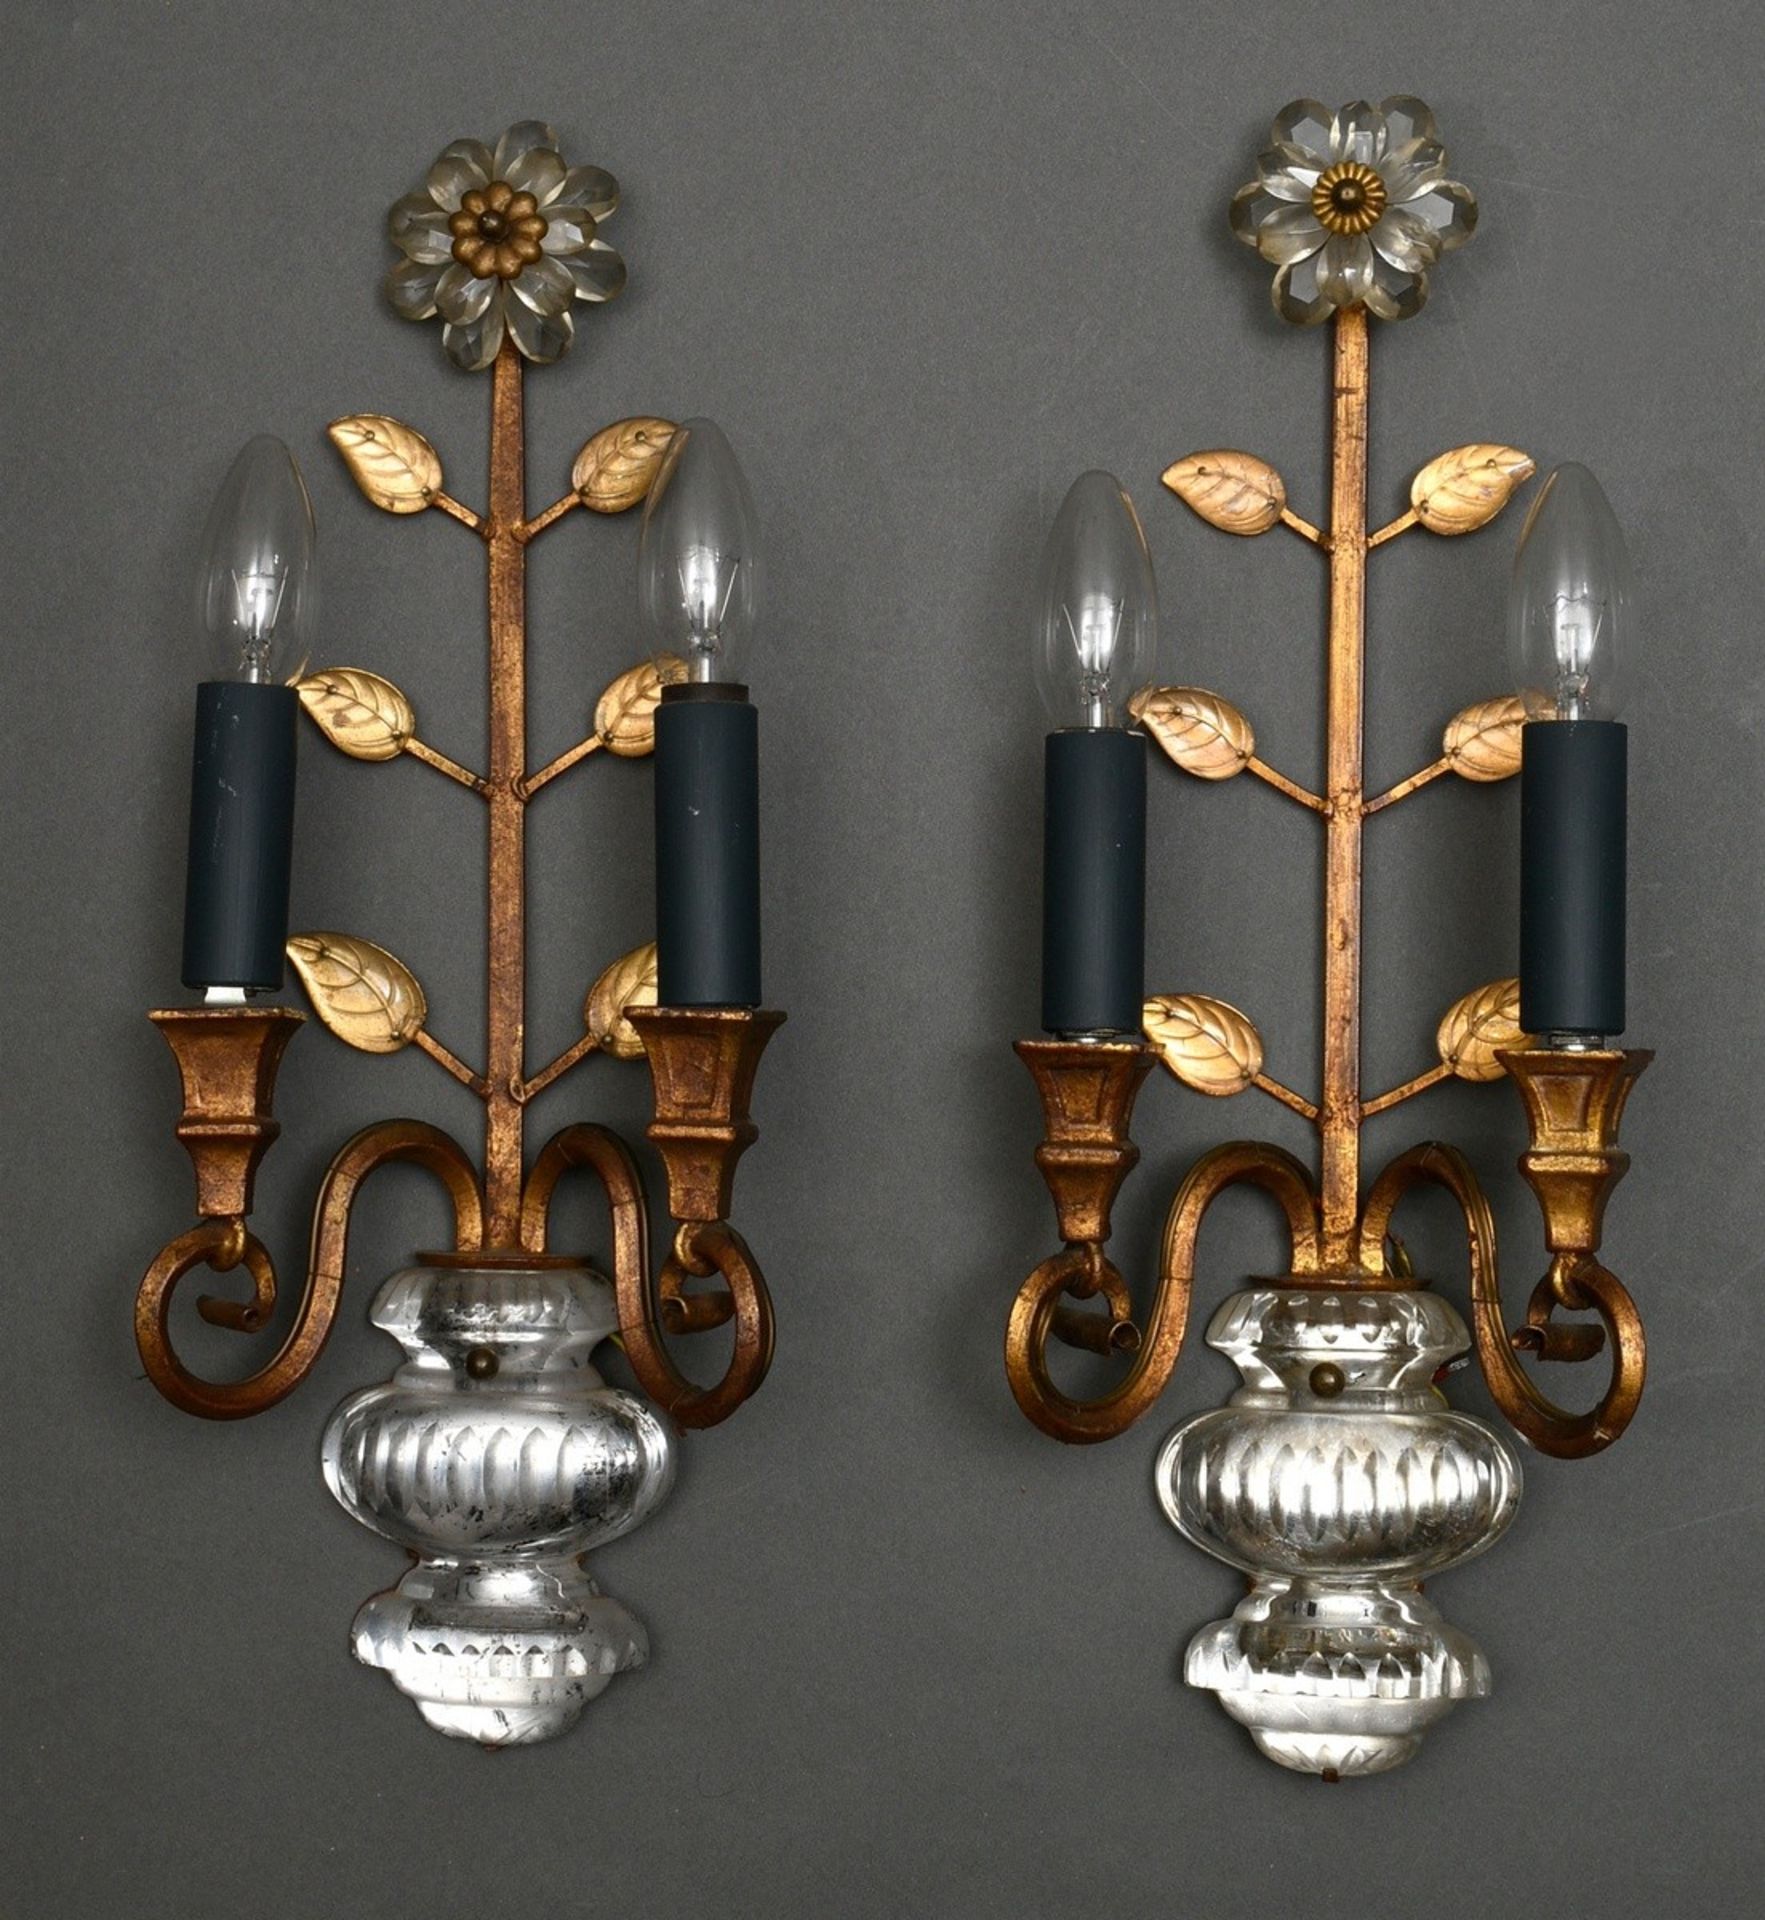 Pair of "Vases" wall lamps in Maison Baguès style, gilded metal with cut mirror glass and prismatic - Image 2 of 5